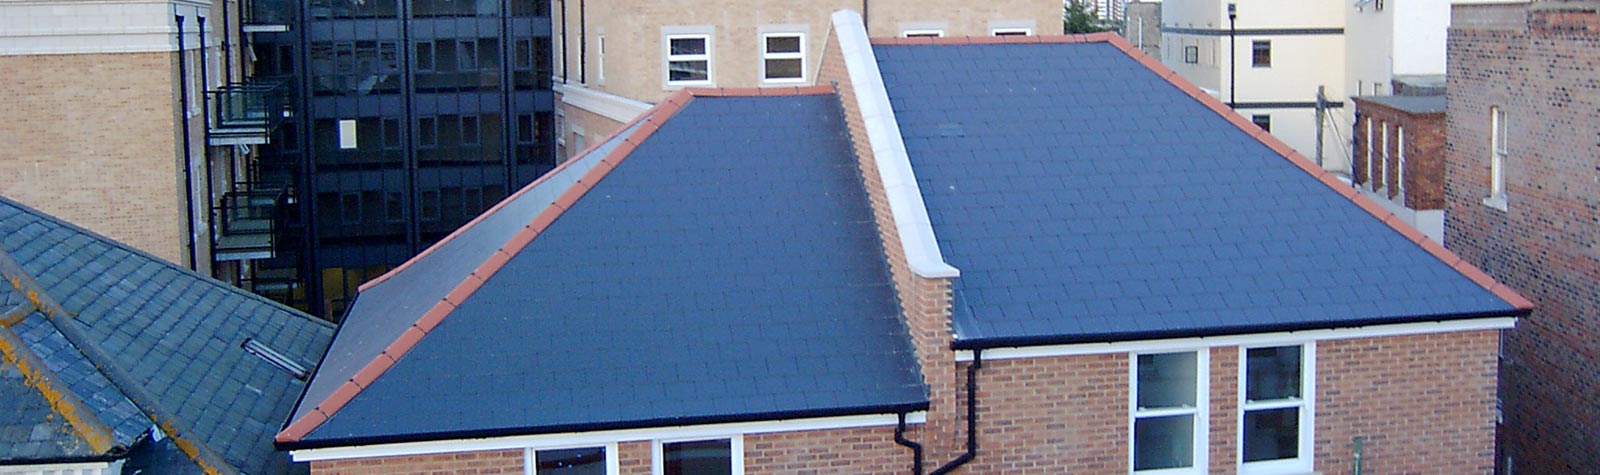 Roofing banner